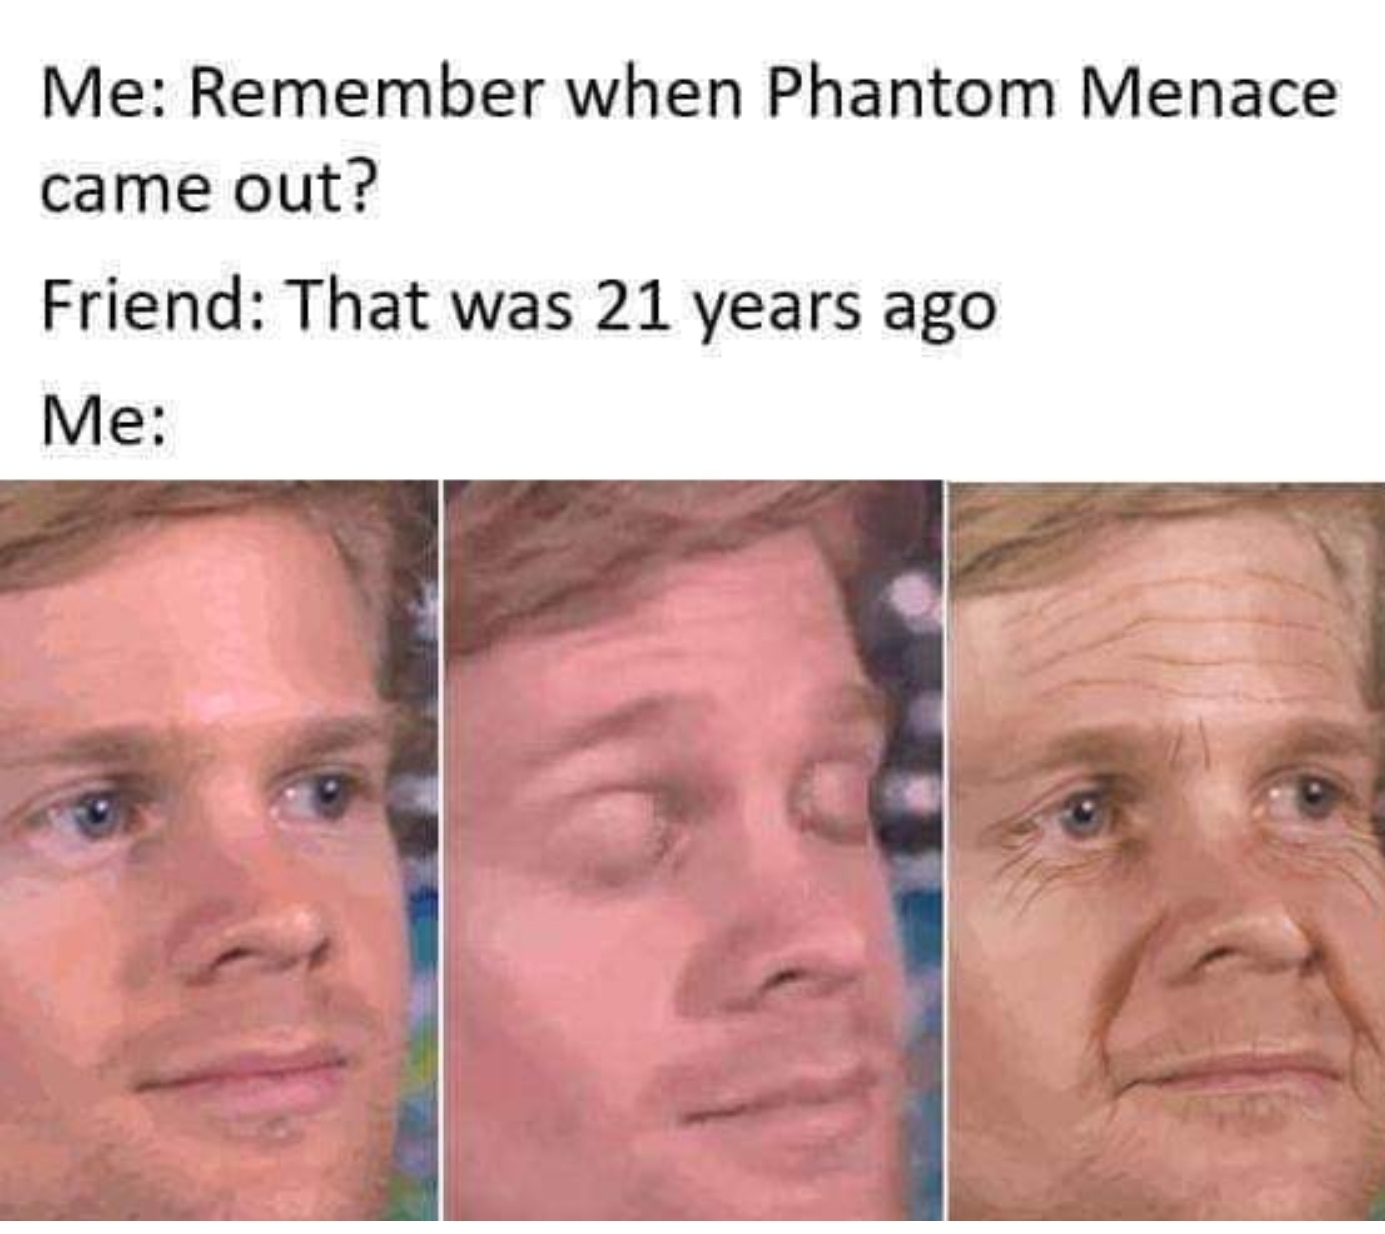 first person to blink must ve been like - Me Remember when Phantom Menace came out? Friend That was 21 years ago Me